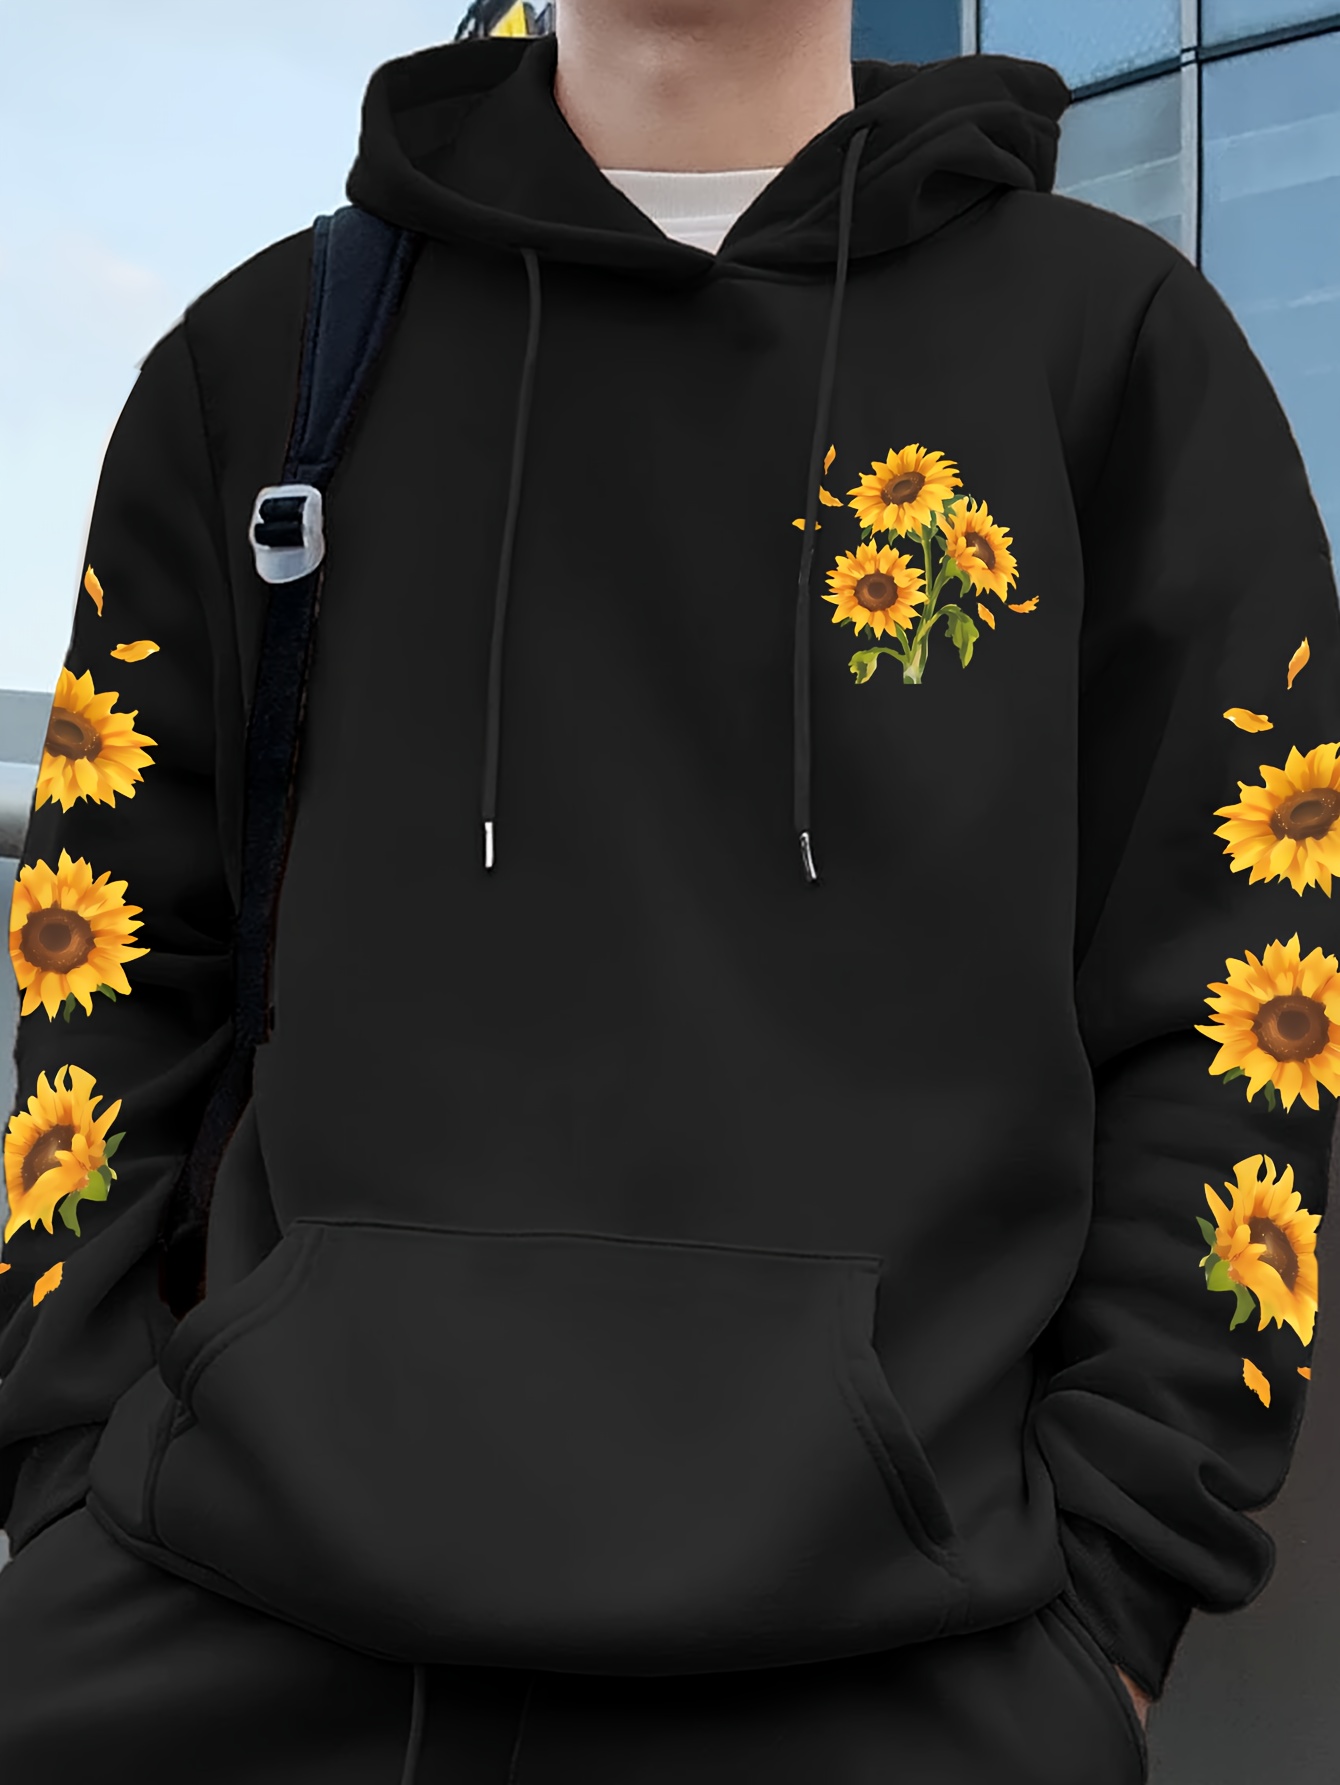 sunflower print mens pullover round neck hoodies with kangaroo pocket long sleeve hooded sweatshirt loose casual top for autumn winter mens clothing as gifts details 31